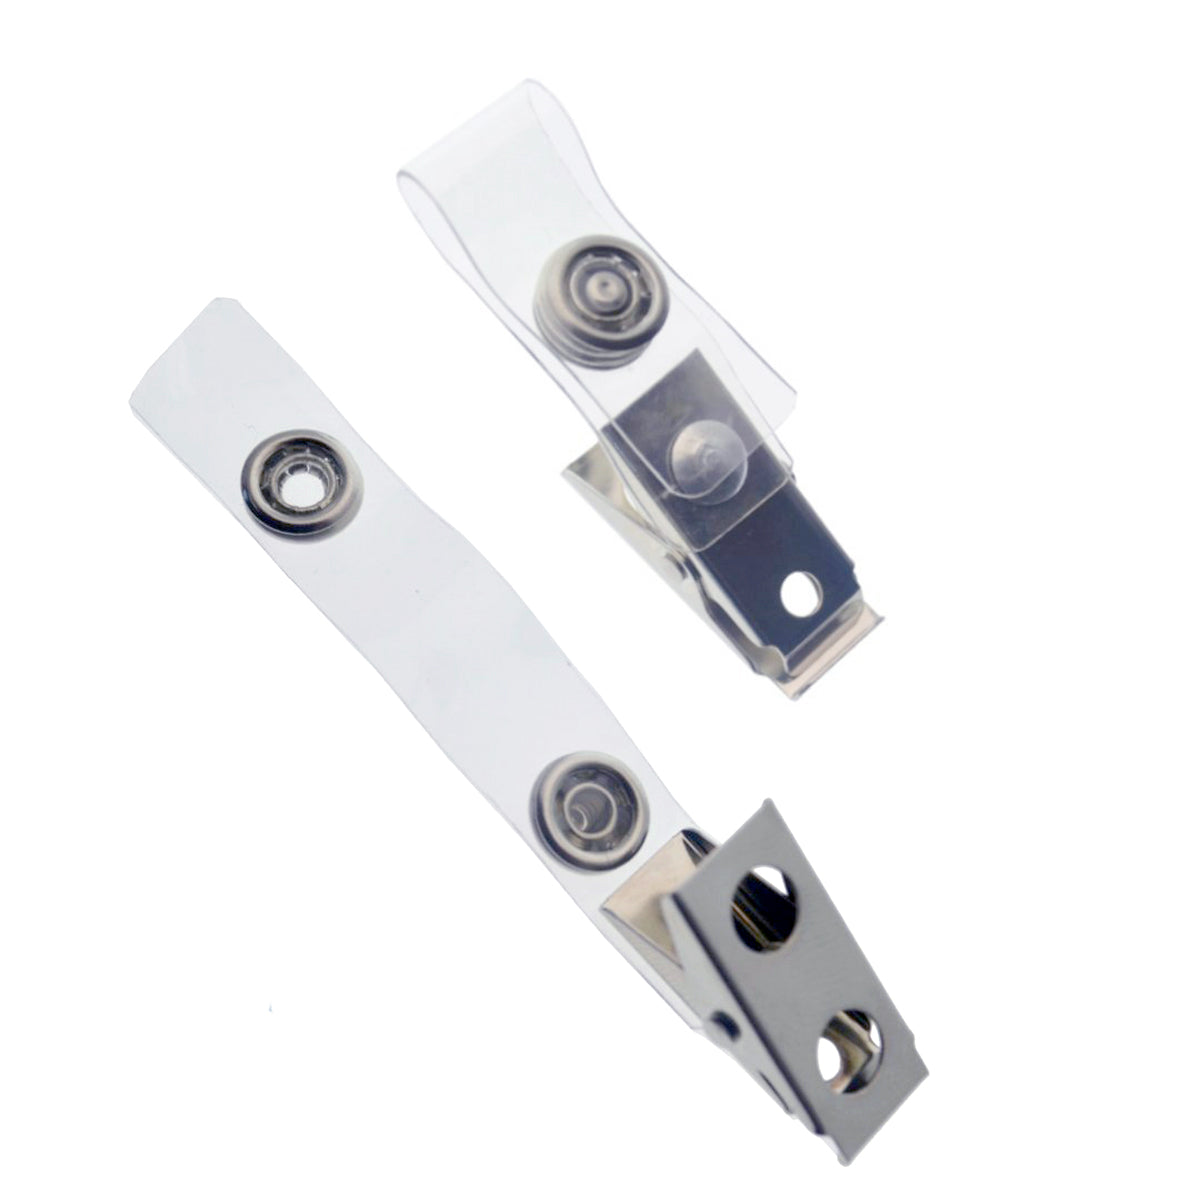 Two ID Badge Strap Clips (Industry Standard Clip) with clear vinyl straps and snaps, used for securely attaching identification badges.